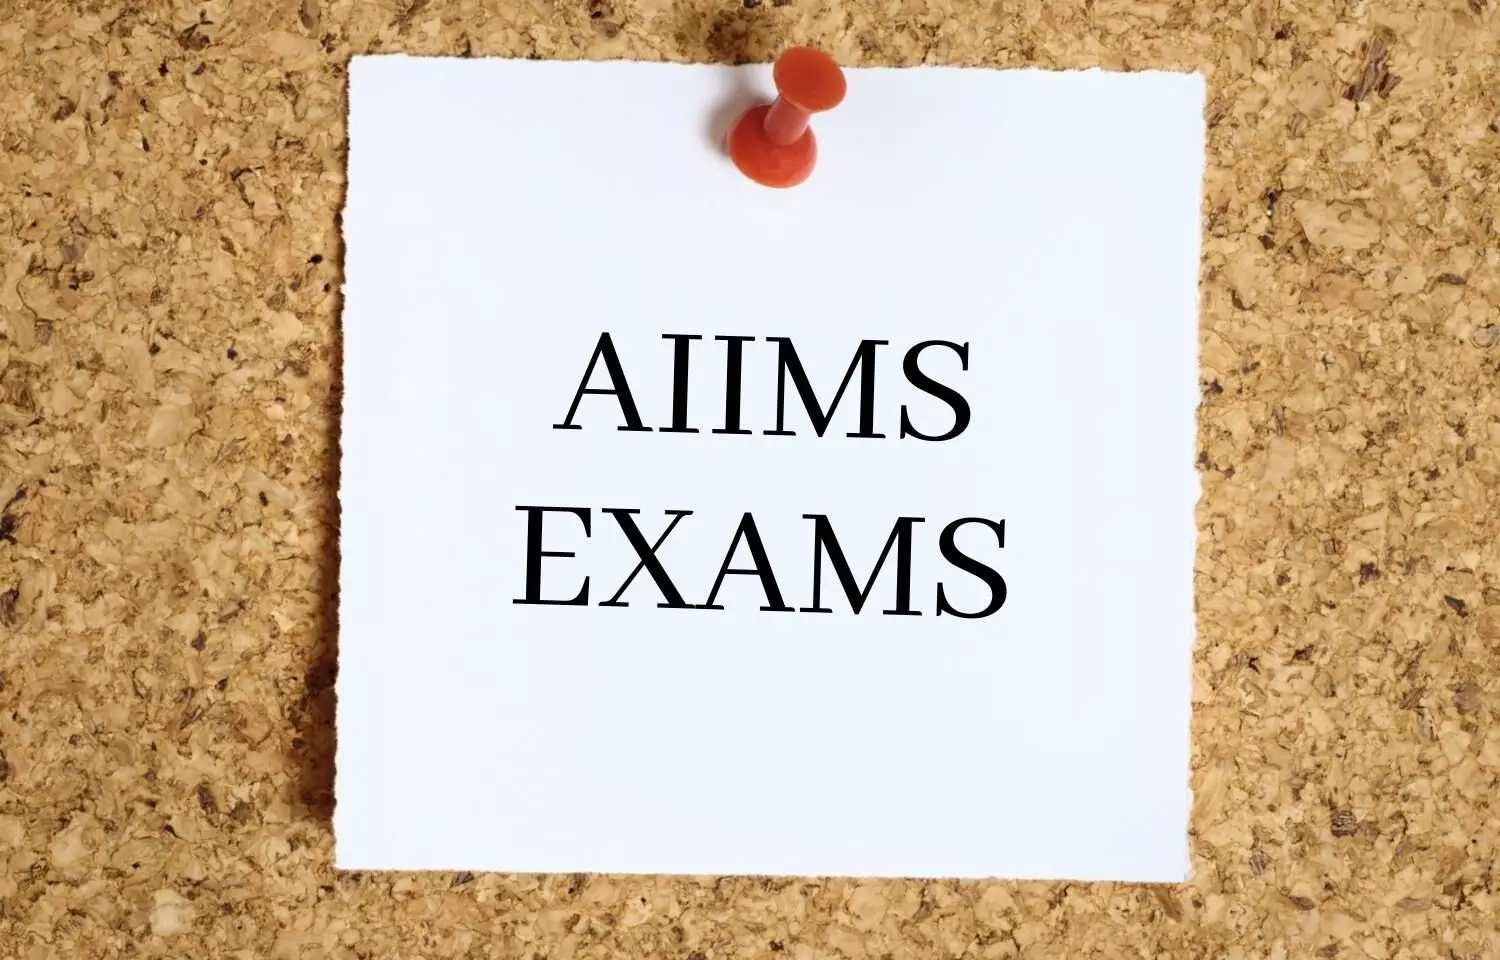 AIIMS releases schedule for exam fee payment, Admit Card for PG medical Professional exams May 2022